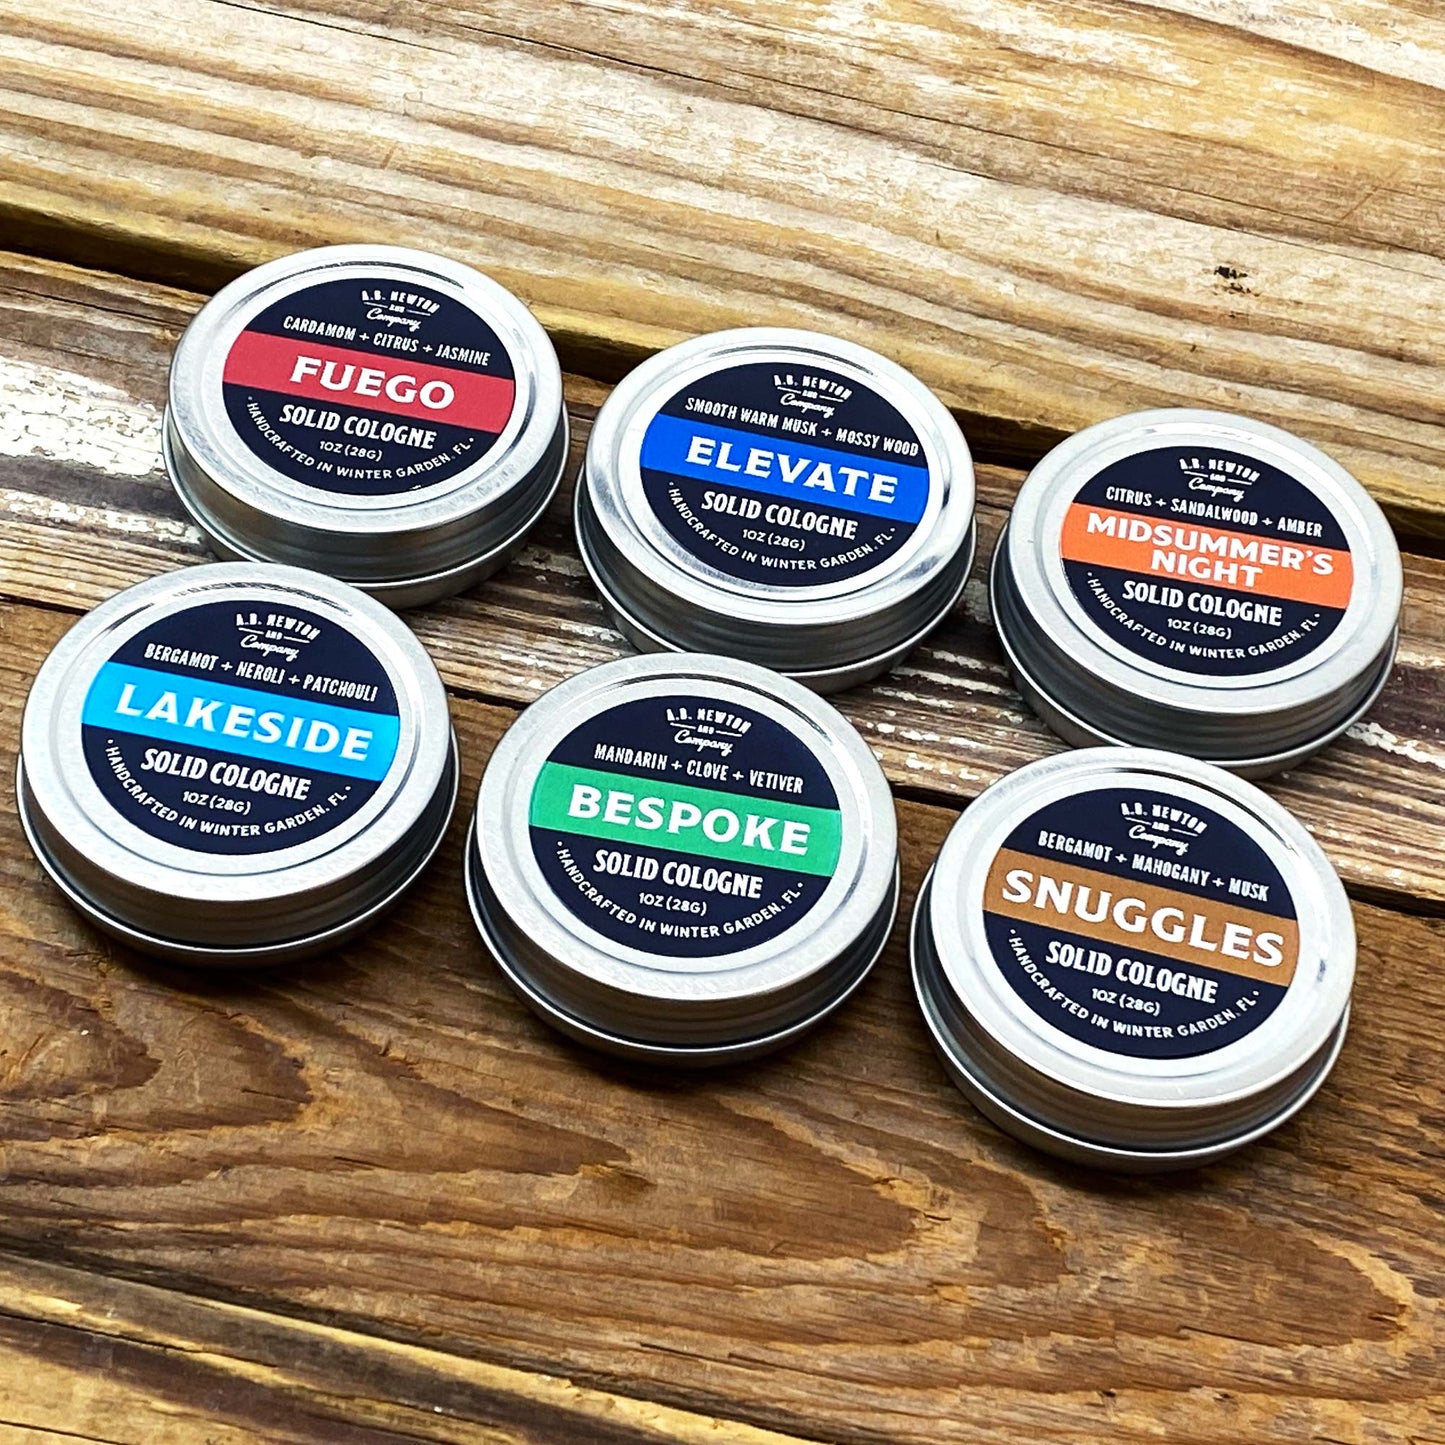 Fuego Handcrafted All Natural Solid Cologne 1oz